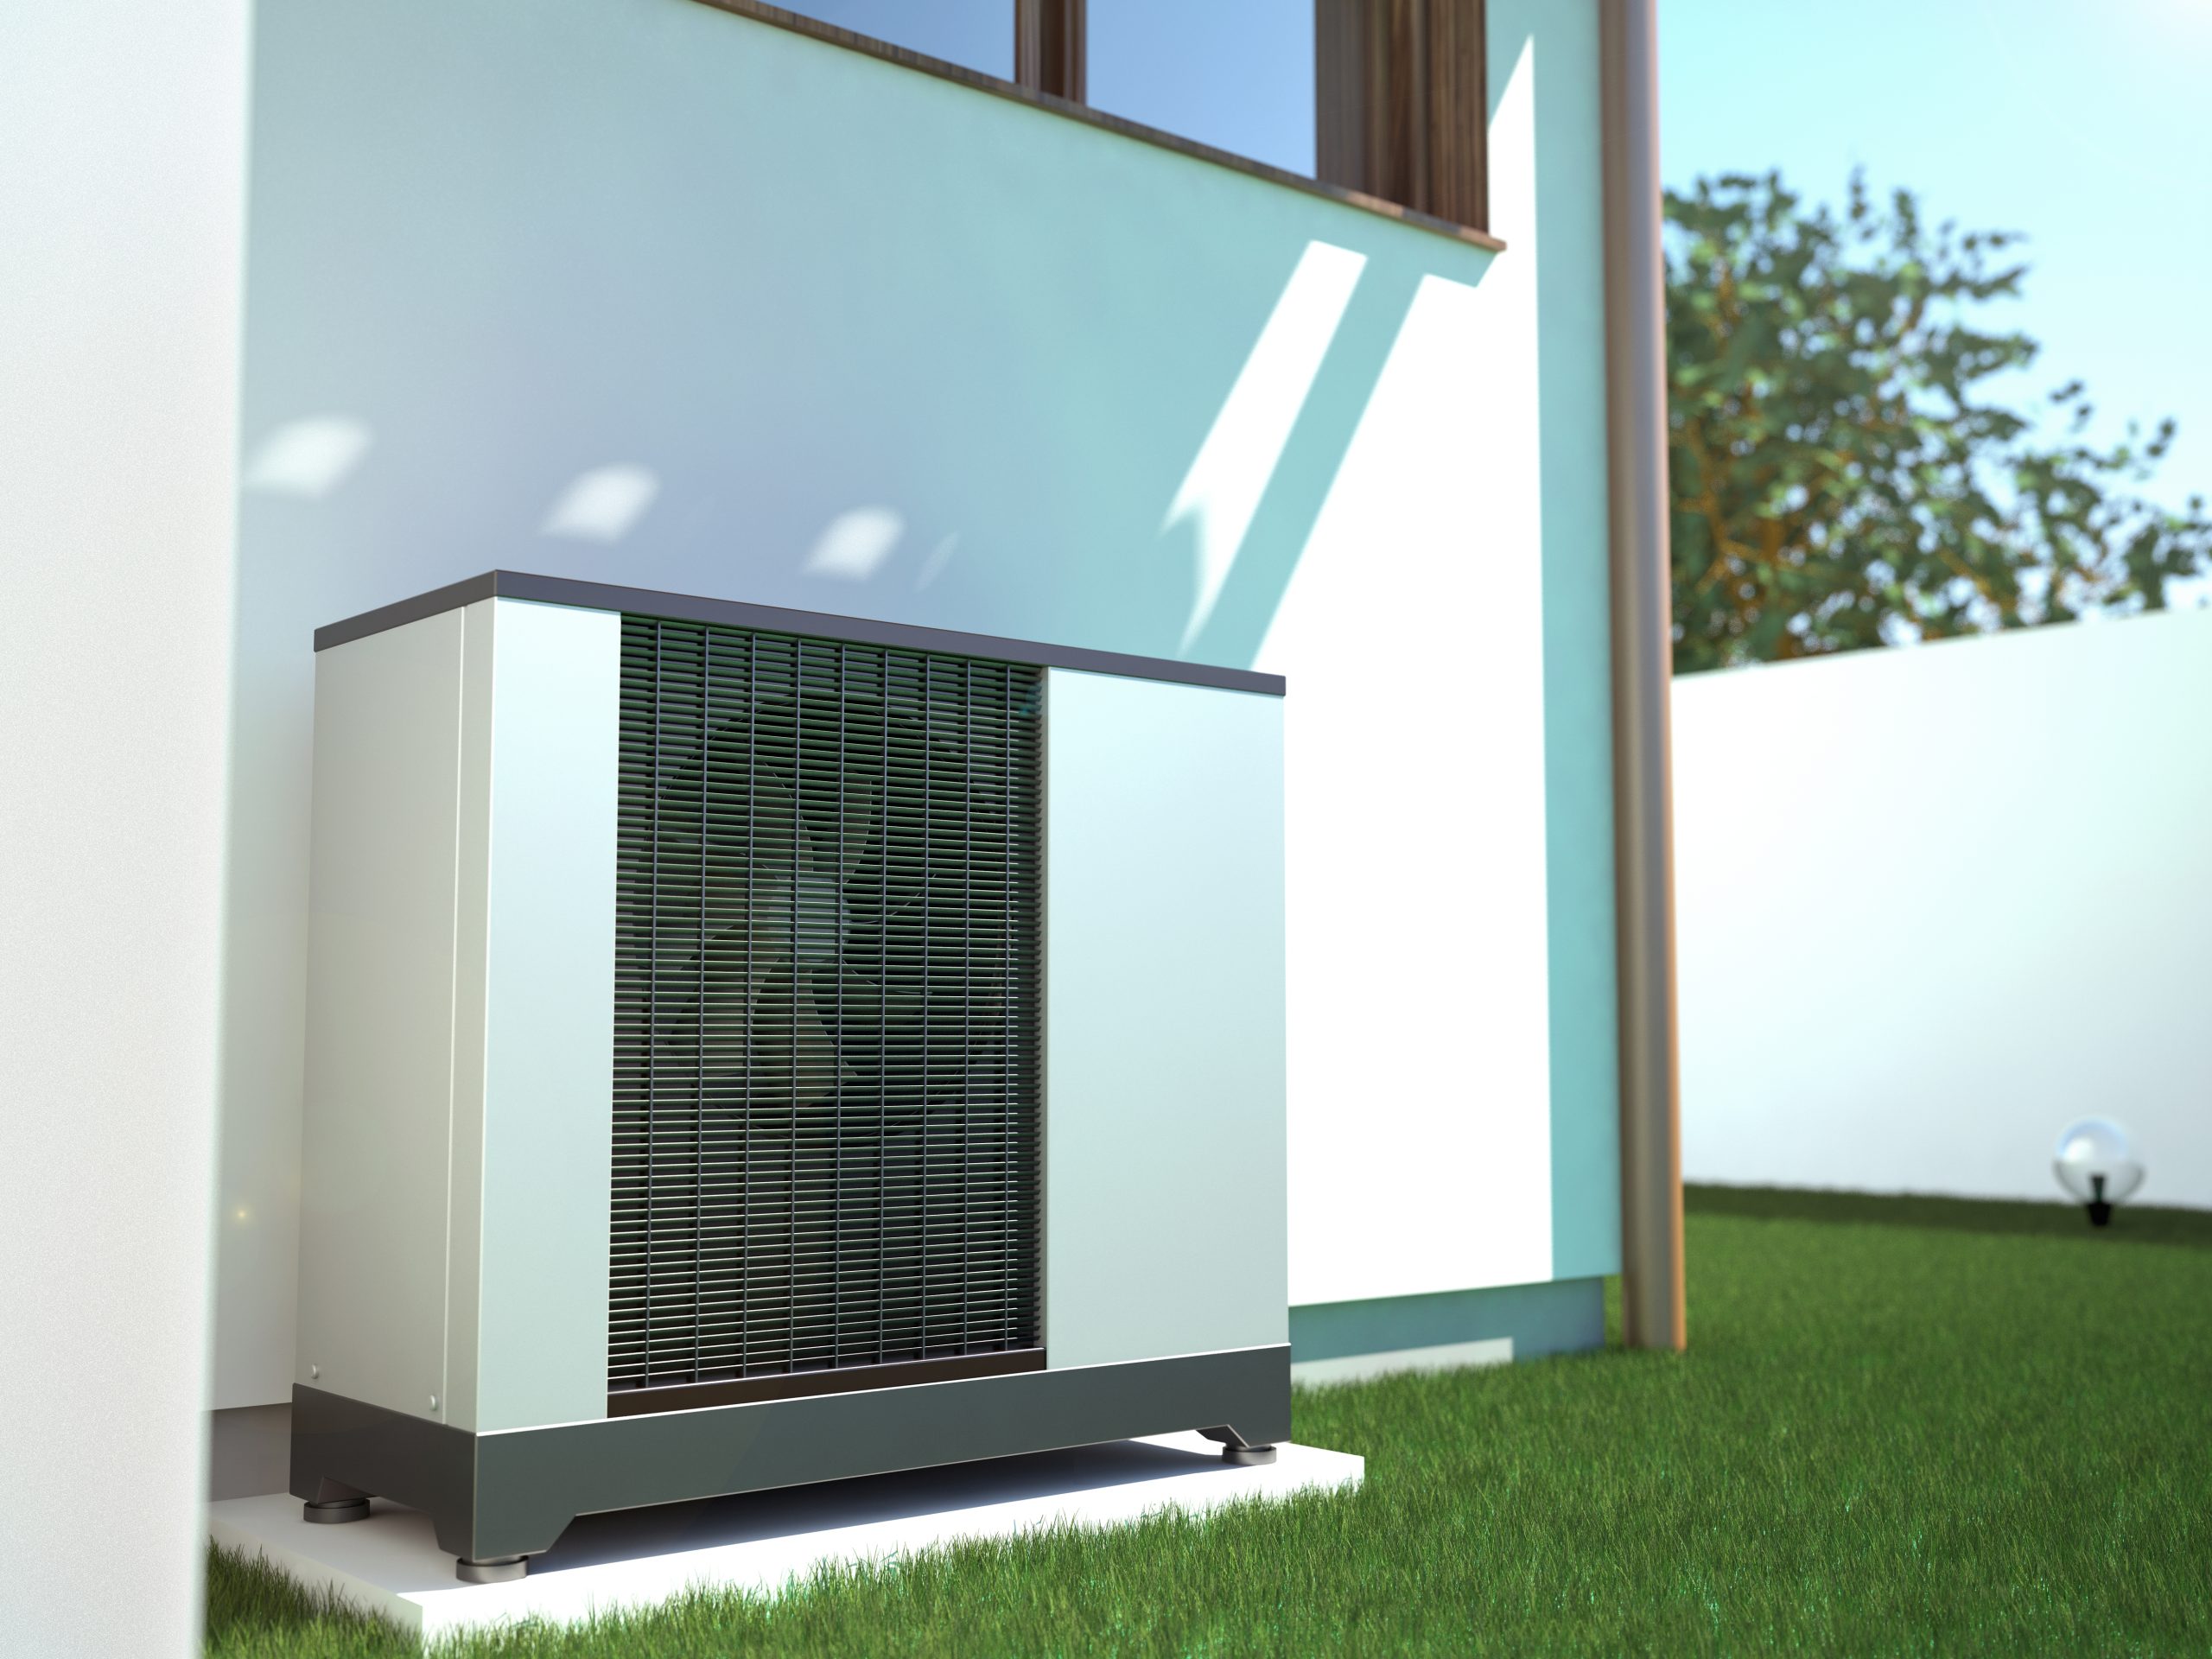 A 3D illustration of a heat pump outside a home.